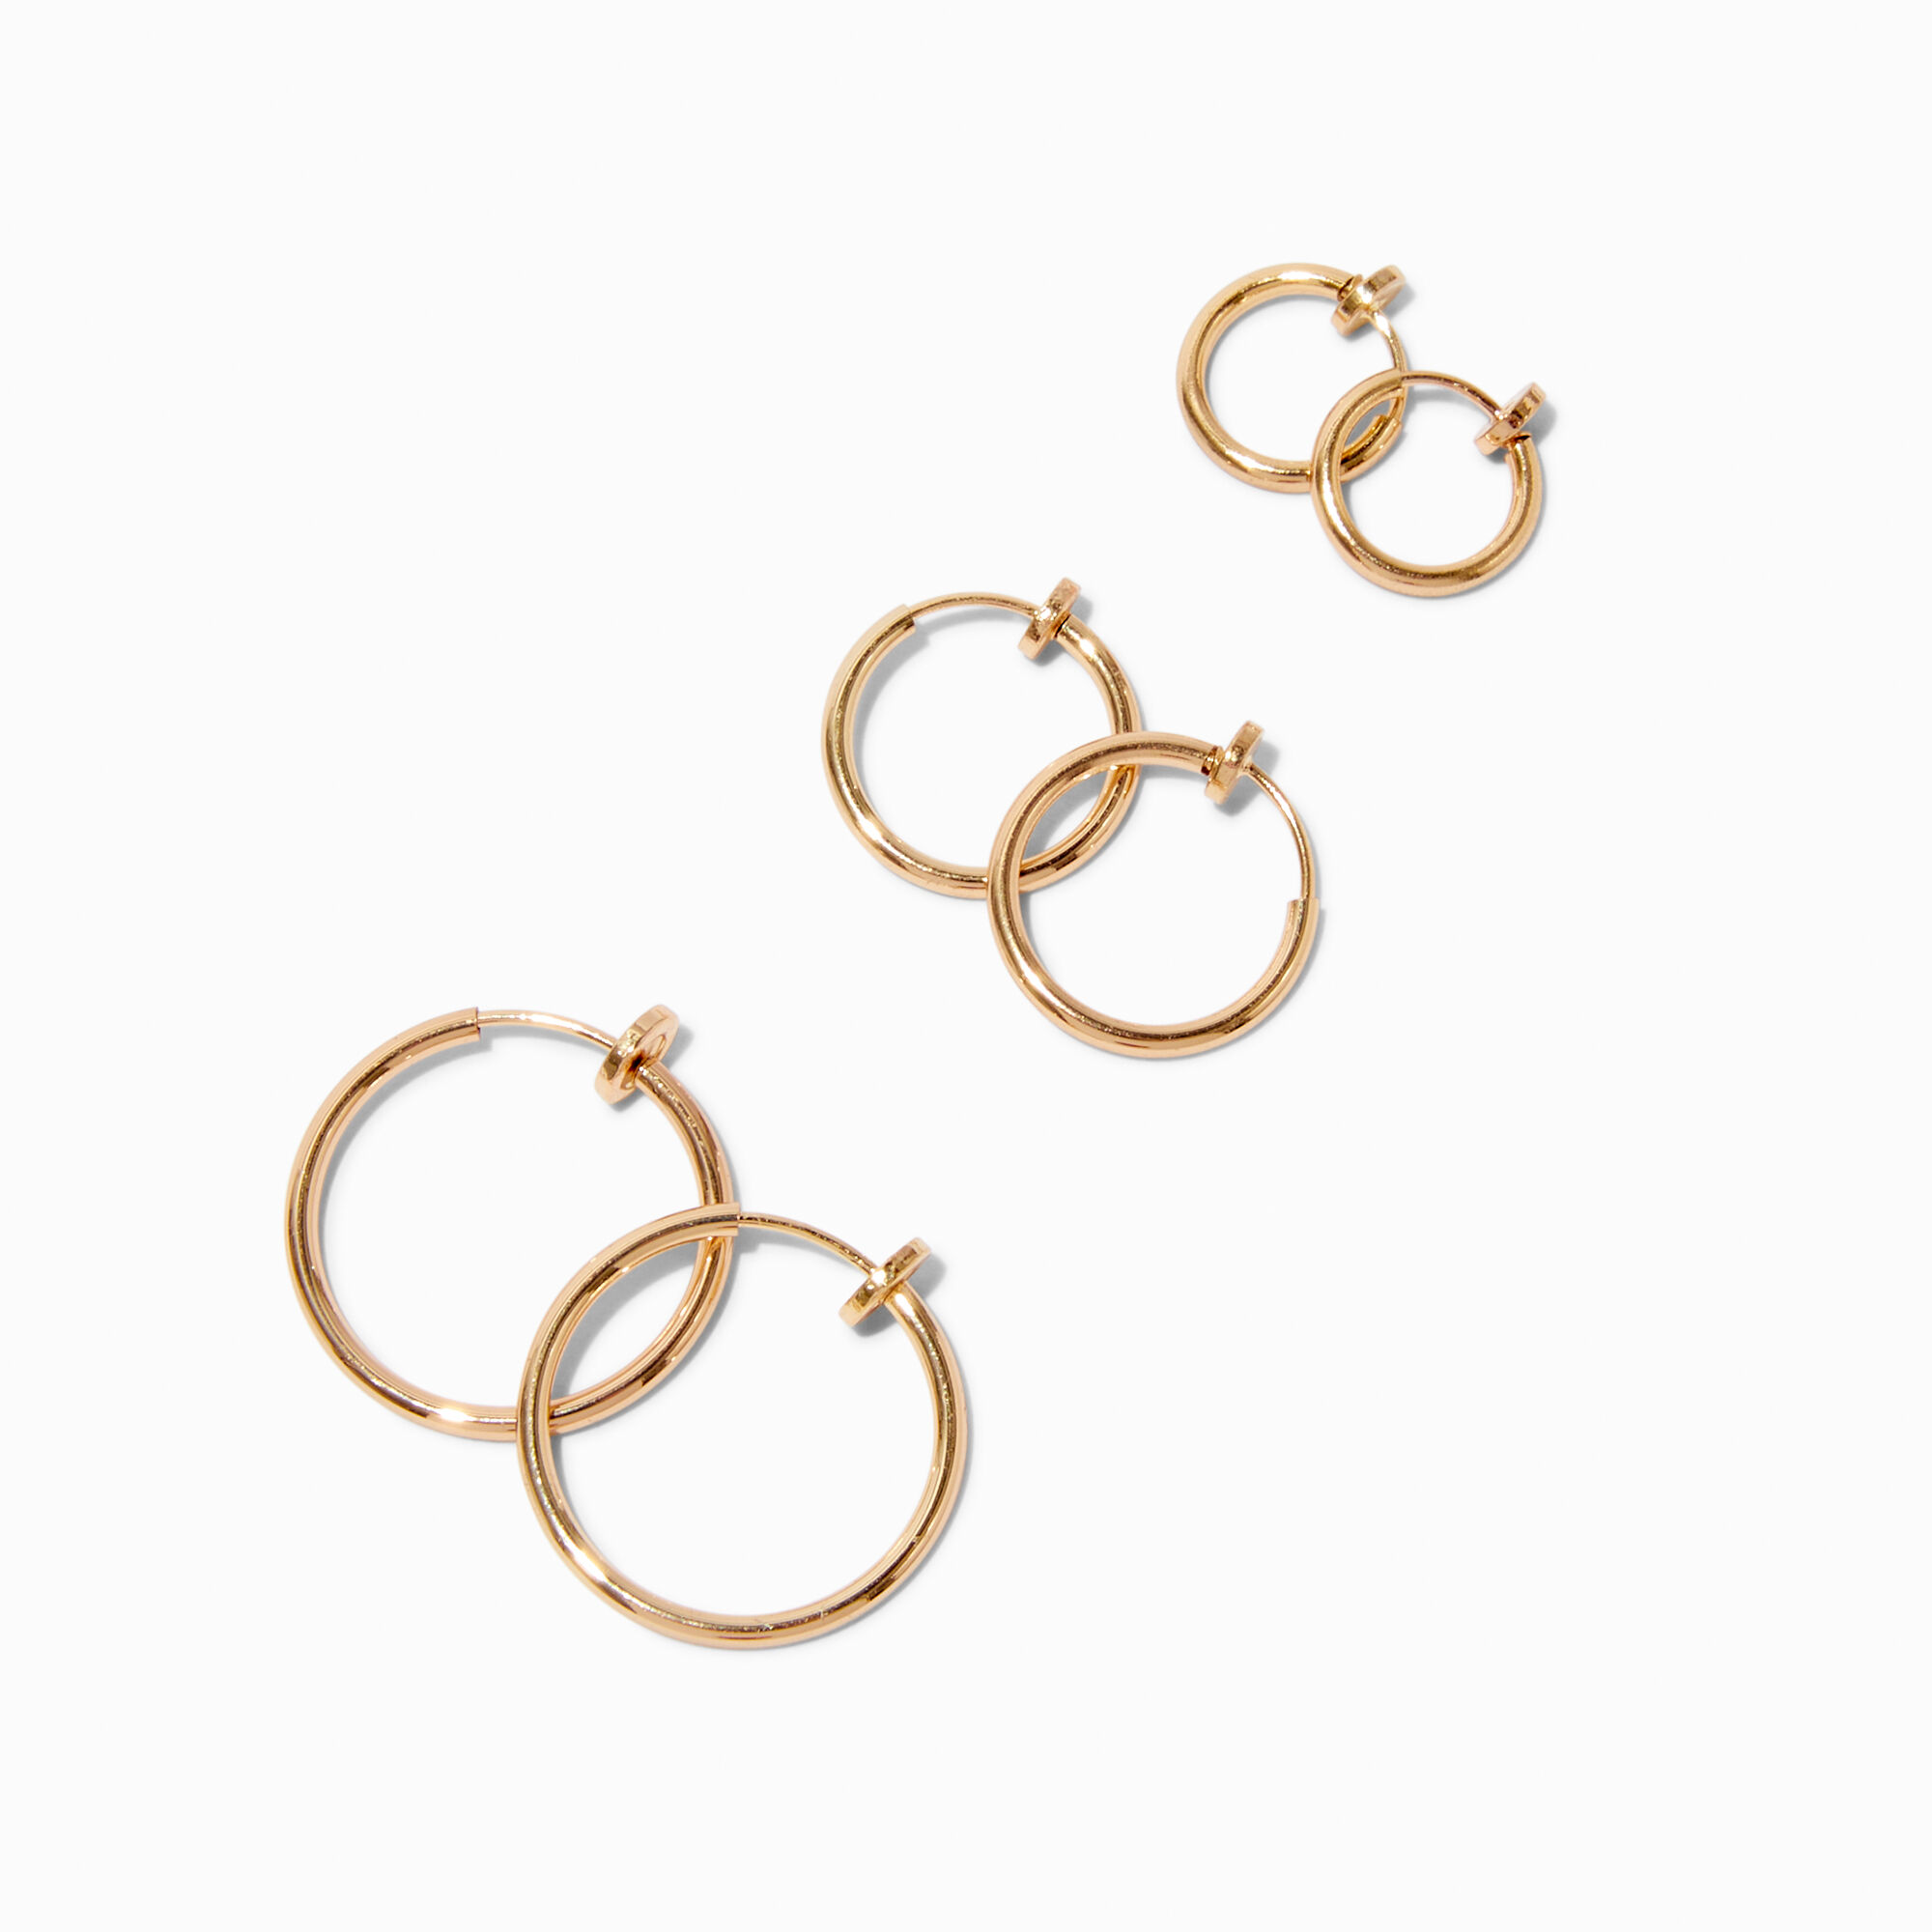 View Claires Tone 10MM15MM20MM ClipOn Hoop Earrings 3 Pack Gold information